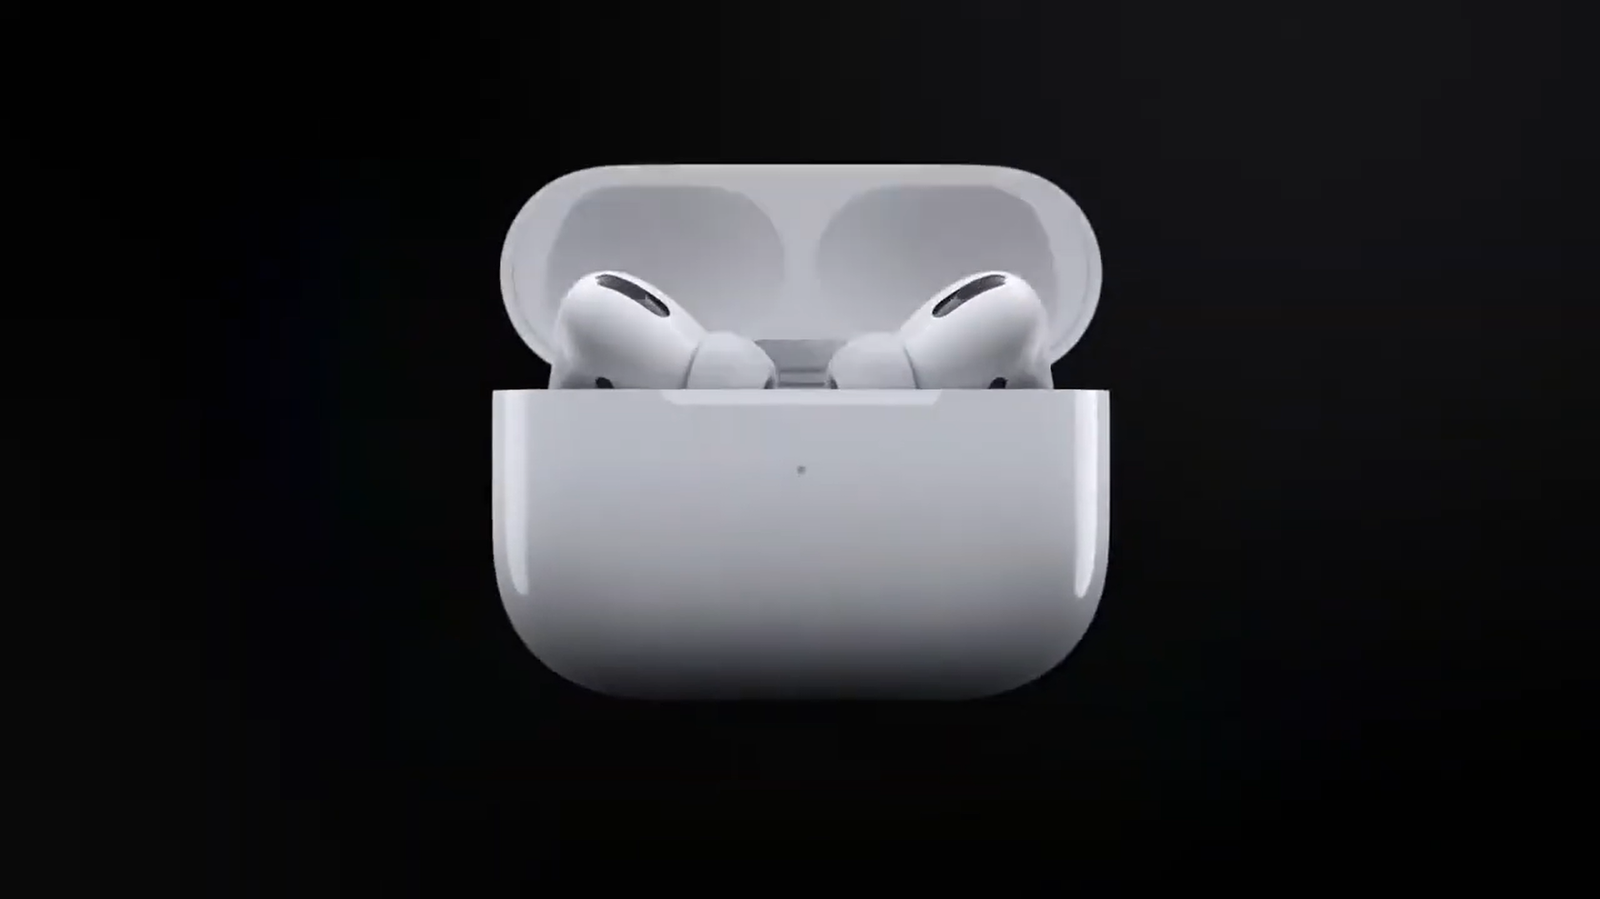 White Apple AirPods Pro in their case.